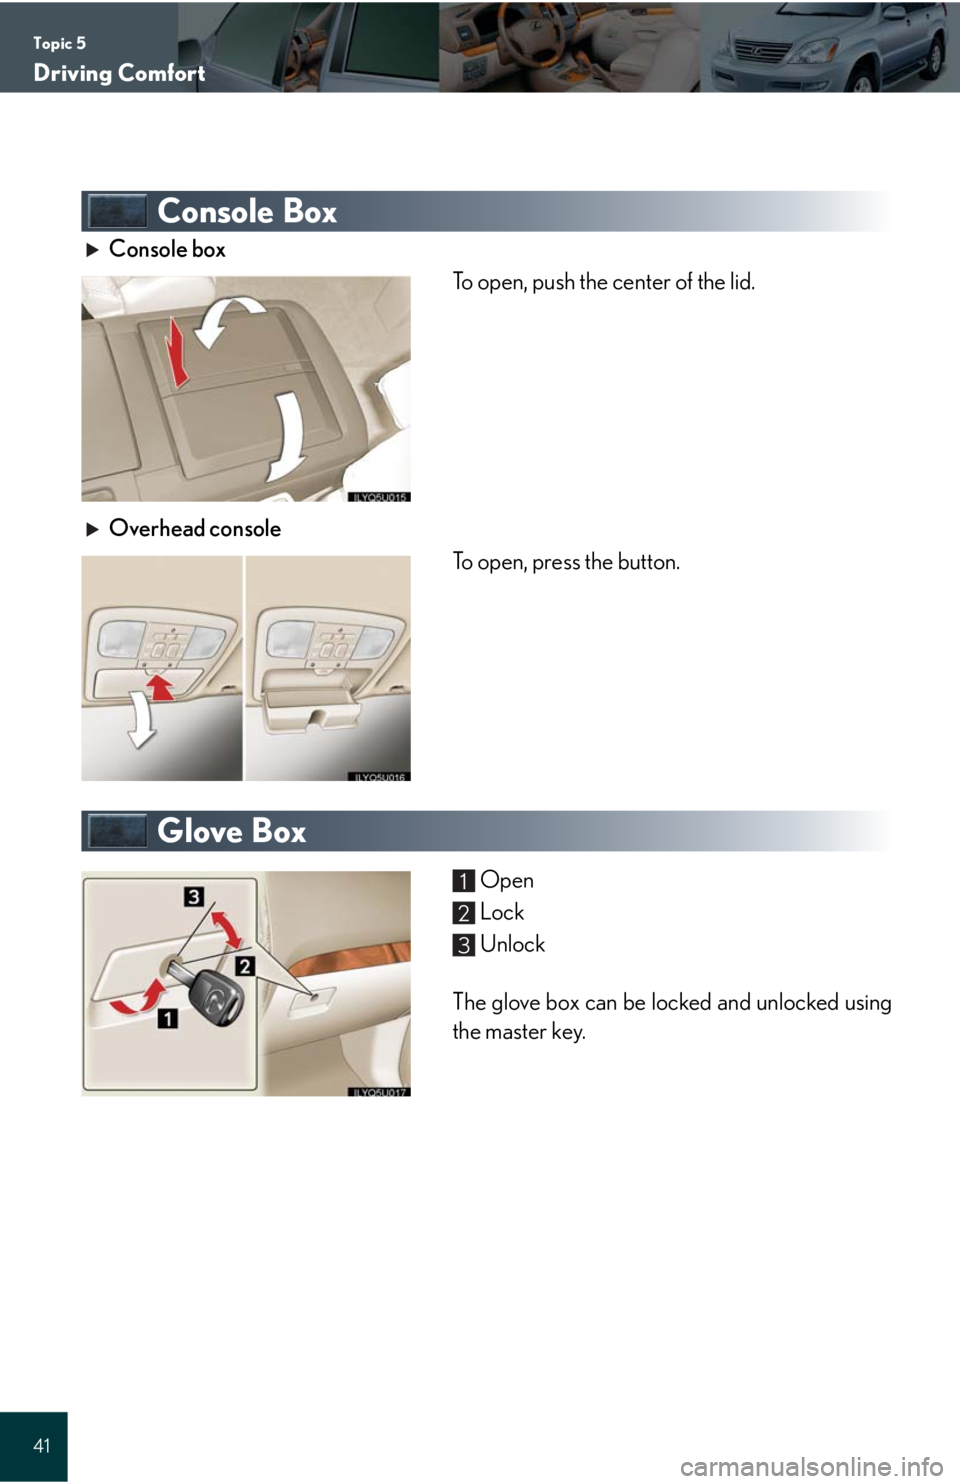 Lexus GX470 2008  Refueling / LEXUS 2008 GX470 QUICK GUIDE  (OM60D81U) Service Manual Topic 5
Driving Comfort
41
Console Box
Console box
To open, push the center of the lid.
Overhead console
To open, press the button.
Glove Box
Open
Lock
Unlock
The glove box can be locked and unlocked 